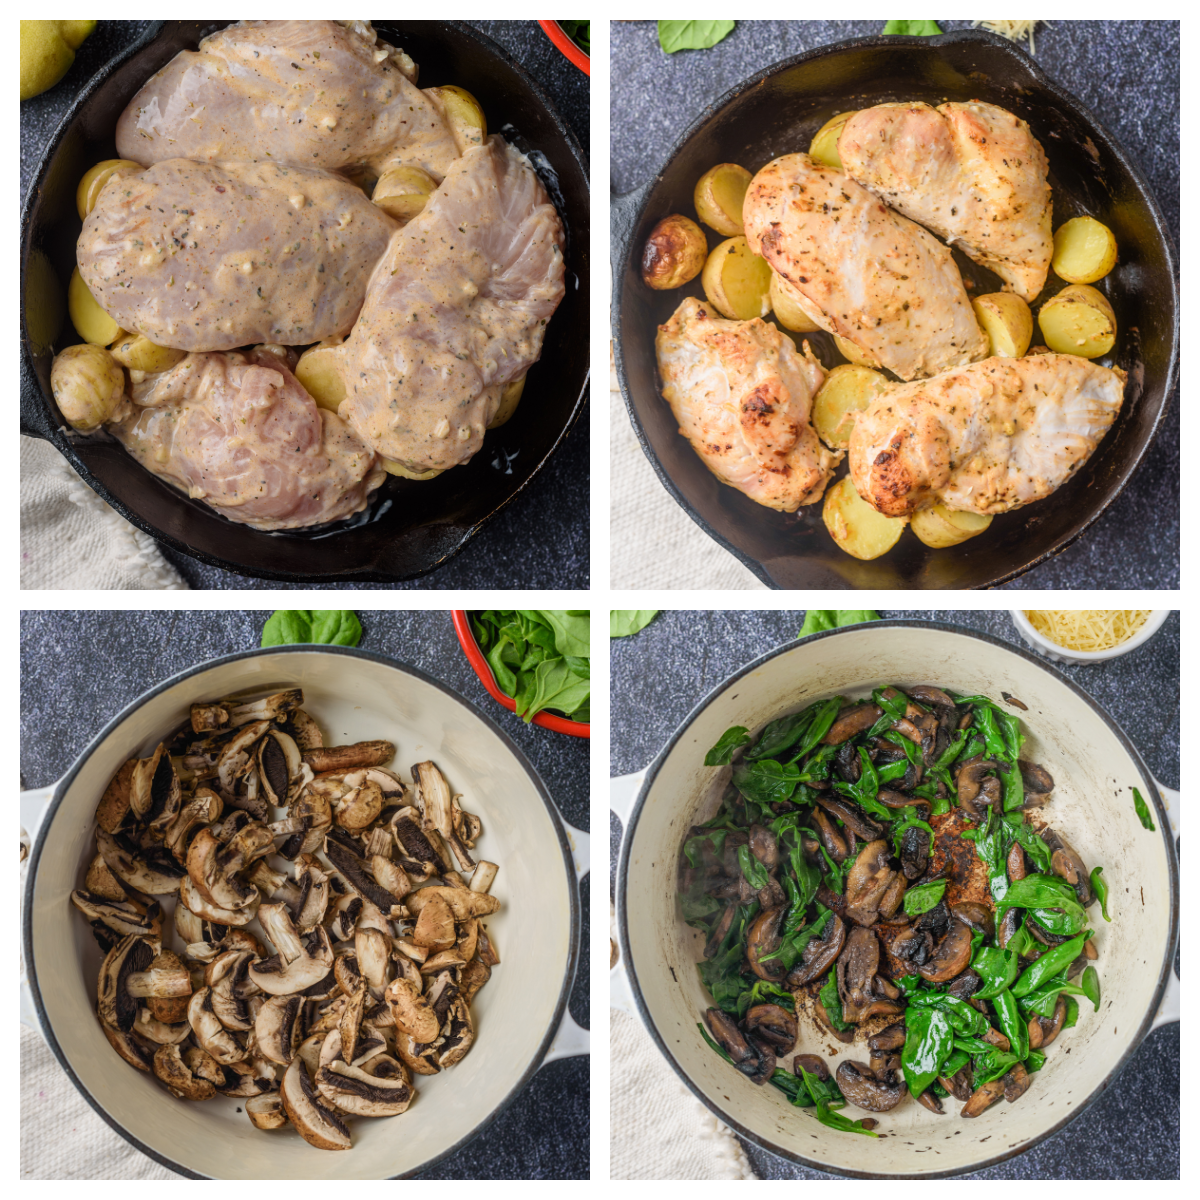 Photos left to right of a 4 photo collage uncooked marinated chicken breasts on top of baby potatoes in a cast iron skillet, cooked chicken and potatoes in cast iron skillet, mushrooms in a pot, sliced mushrooms and spinach mixed in the pot.